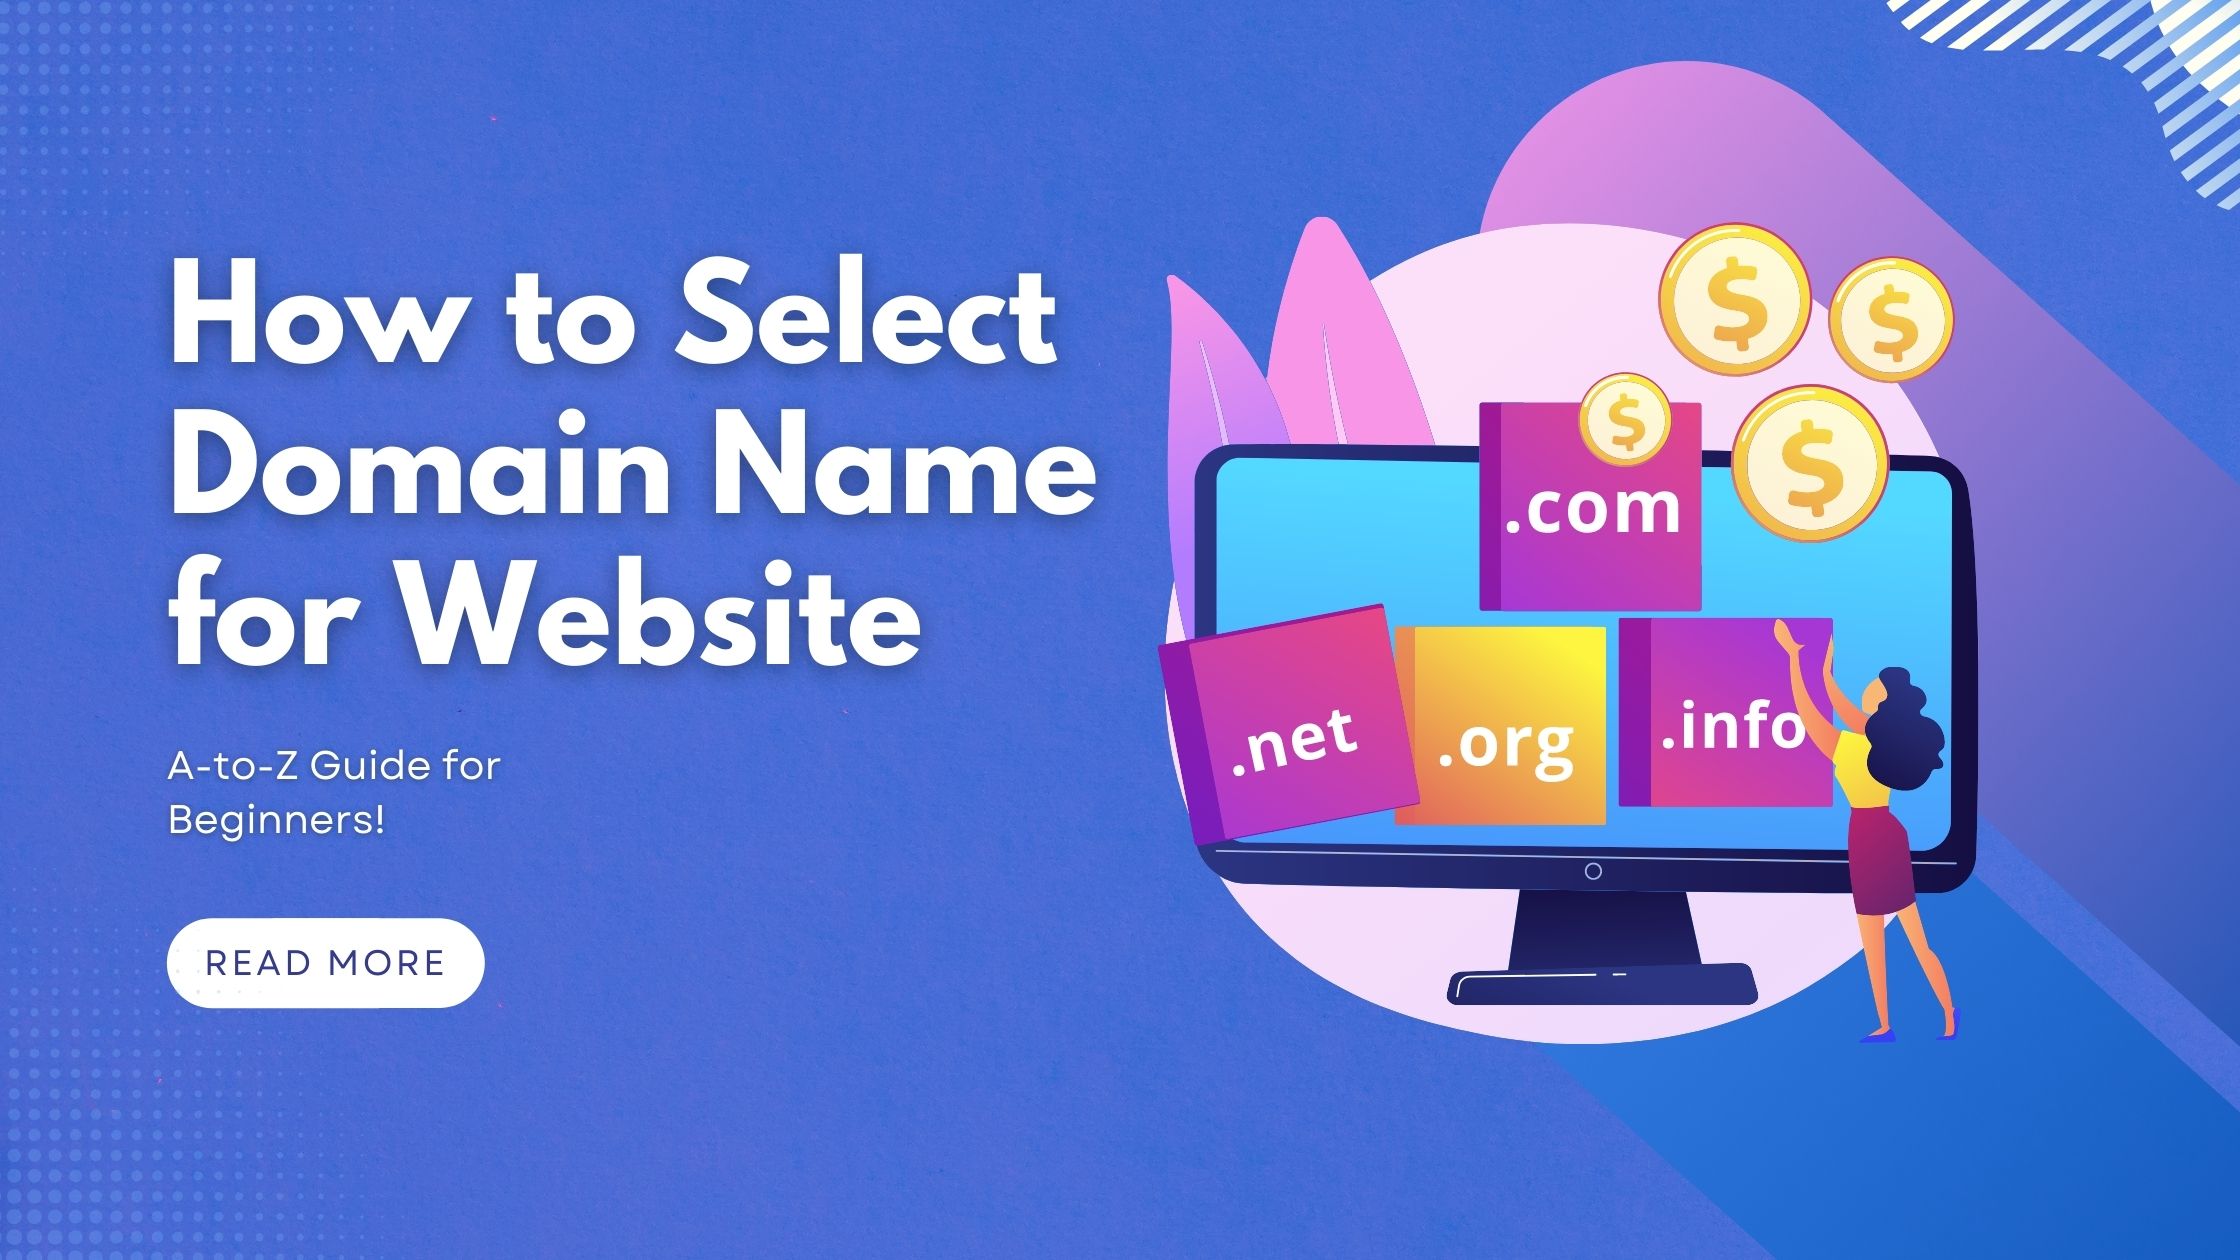 How to Select Domain Name for Website